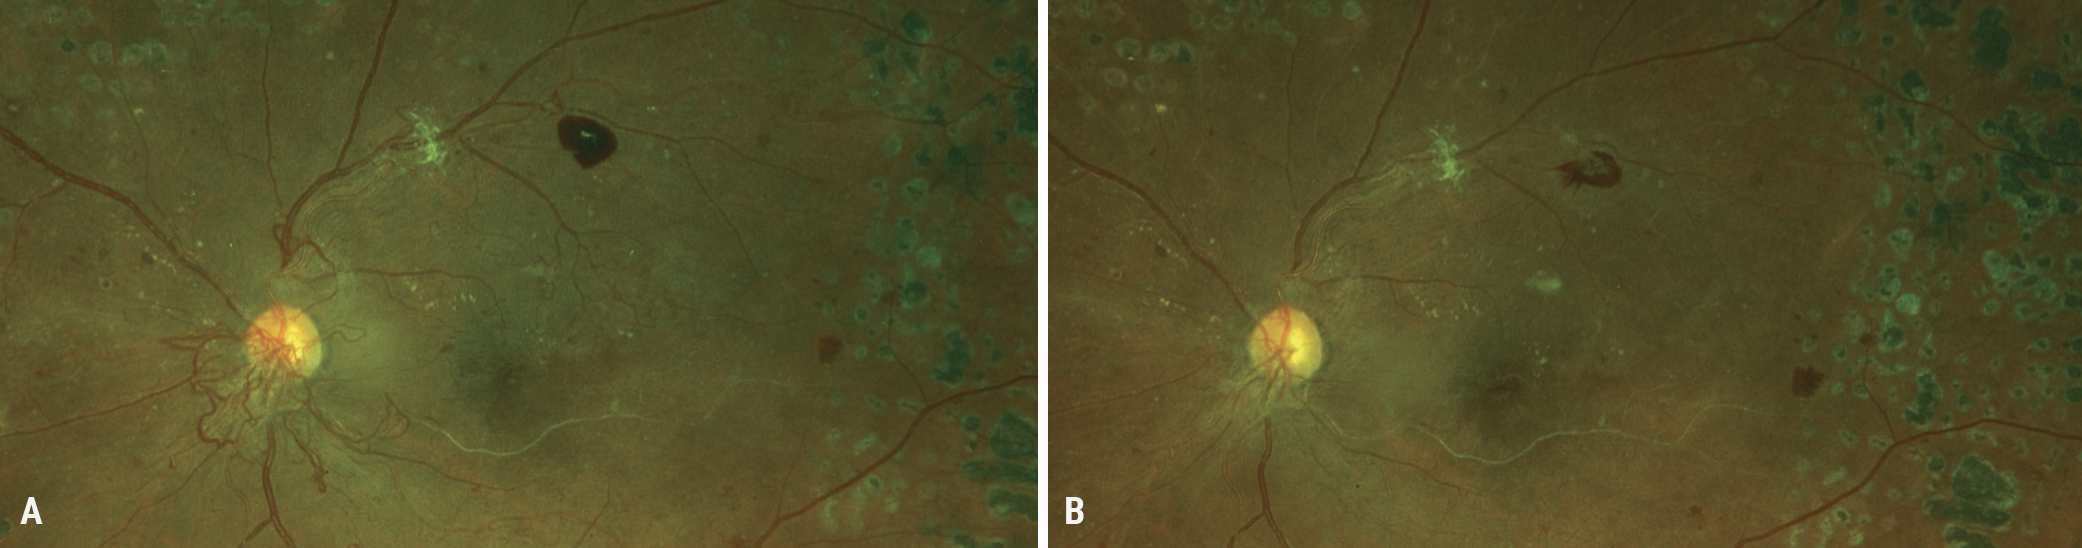 Fig. 3. (A) A 40-year-old Black female presented after noncompliance with significant neovascularization at the disc (NVD). She has previously been treated with panretinal photocoagulation. She received an Avastin injection and returned one month later with resolution of the NVD (B). The patient must be compliant with follow-ups, as the neovascularization can return and require the need for more injections. 